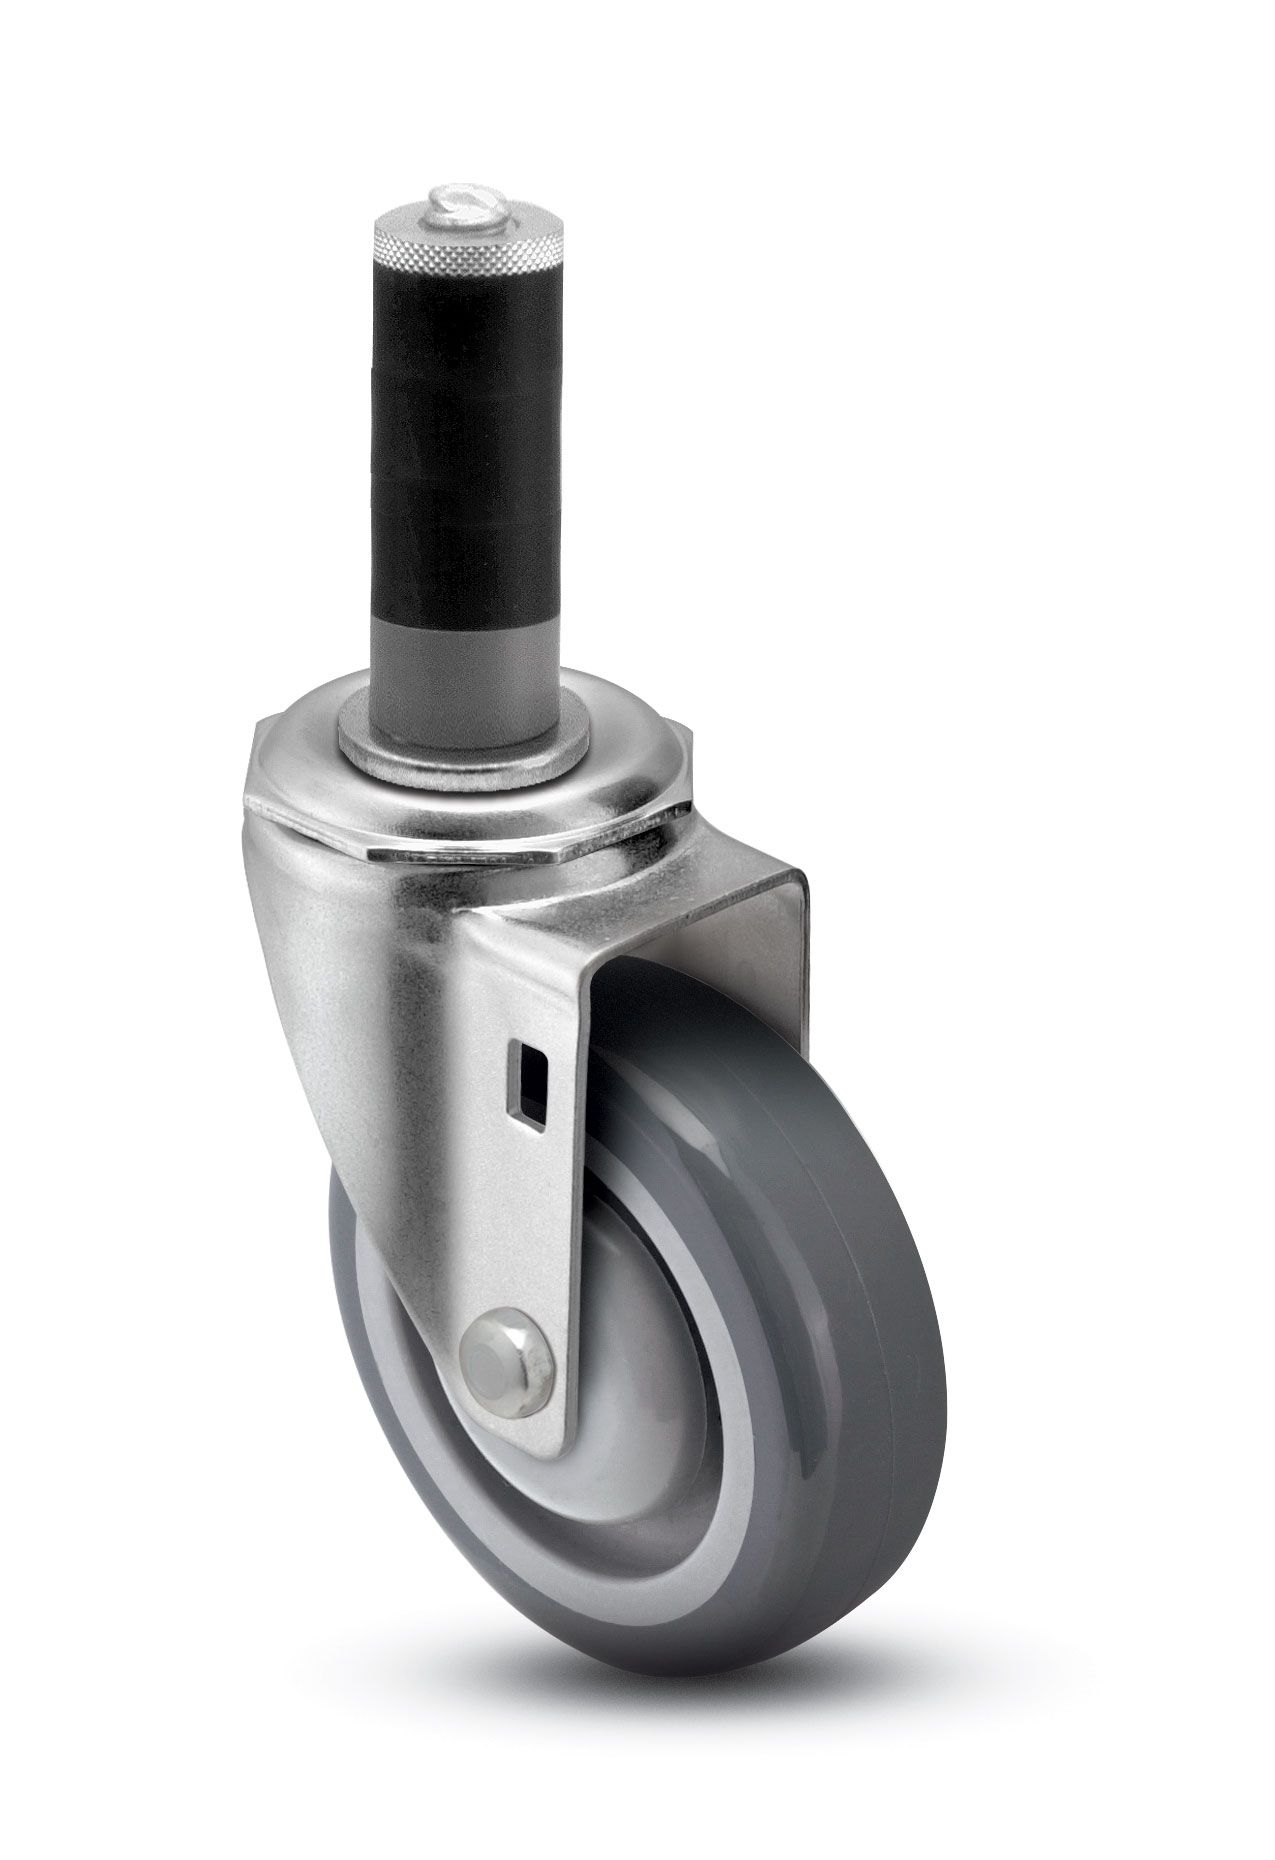 Caster; Swivel; 5" x 1-1/4"; PolyU on PolyO (Gray); Expandable Adapter (1-1/2" - 1-9/16" ID tubing); Zinc; Precision Ball Brng; 300#; Dust Cover; Pedal Brake (Item #64265)